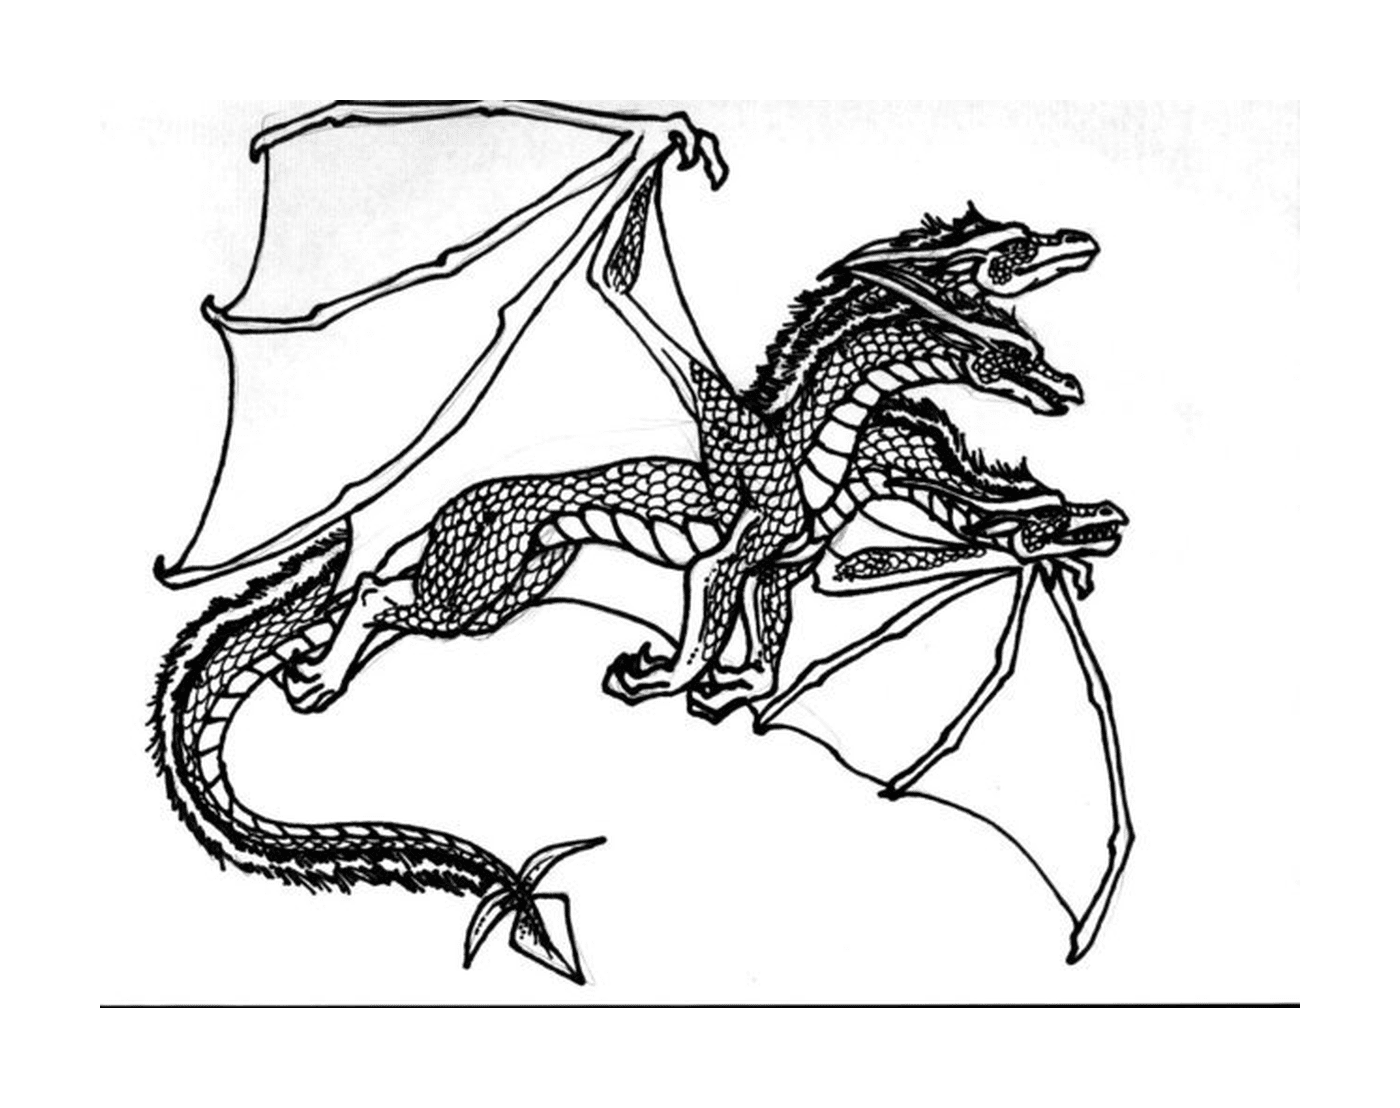  Dragon with spread wings 